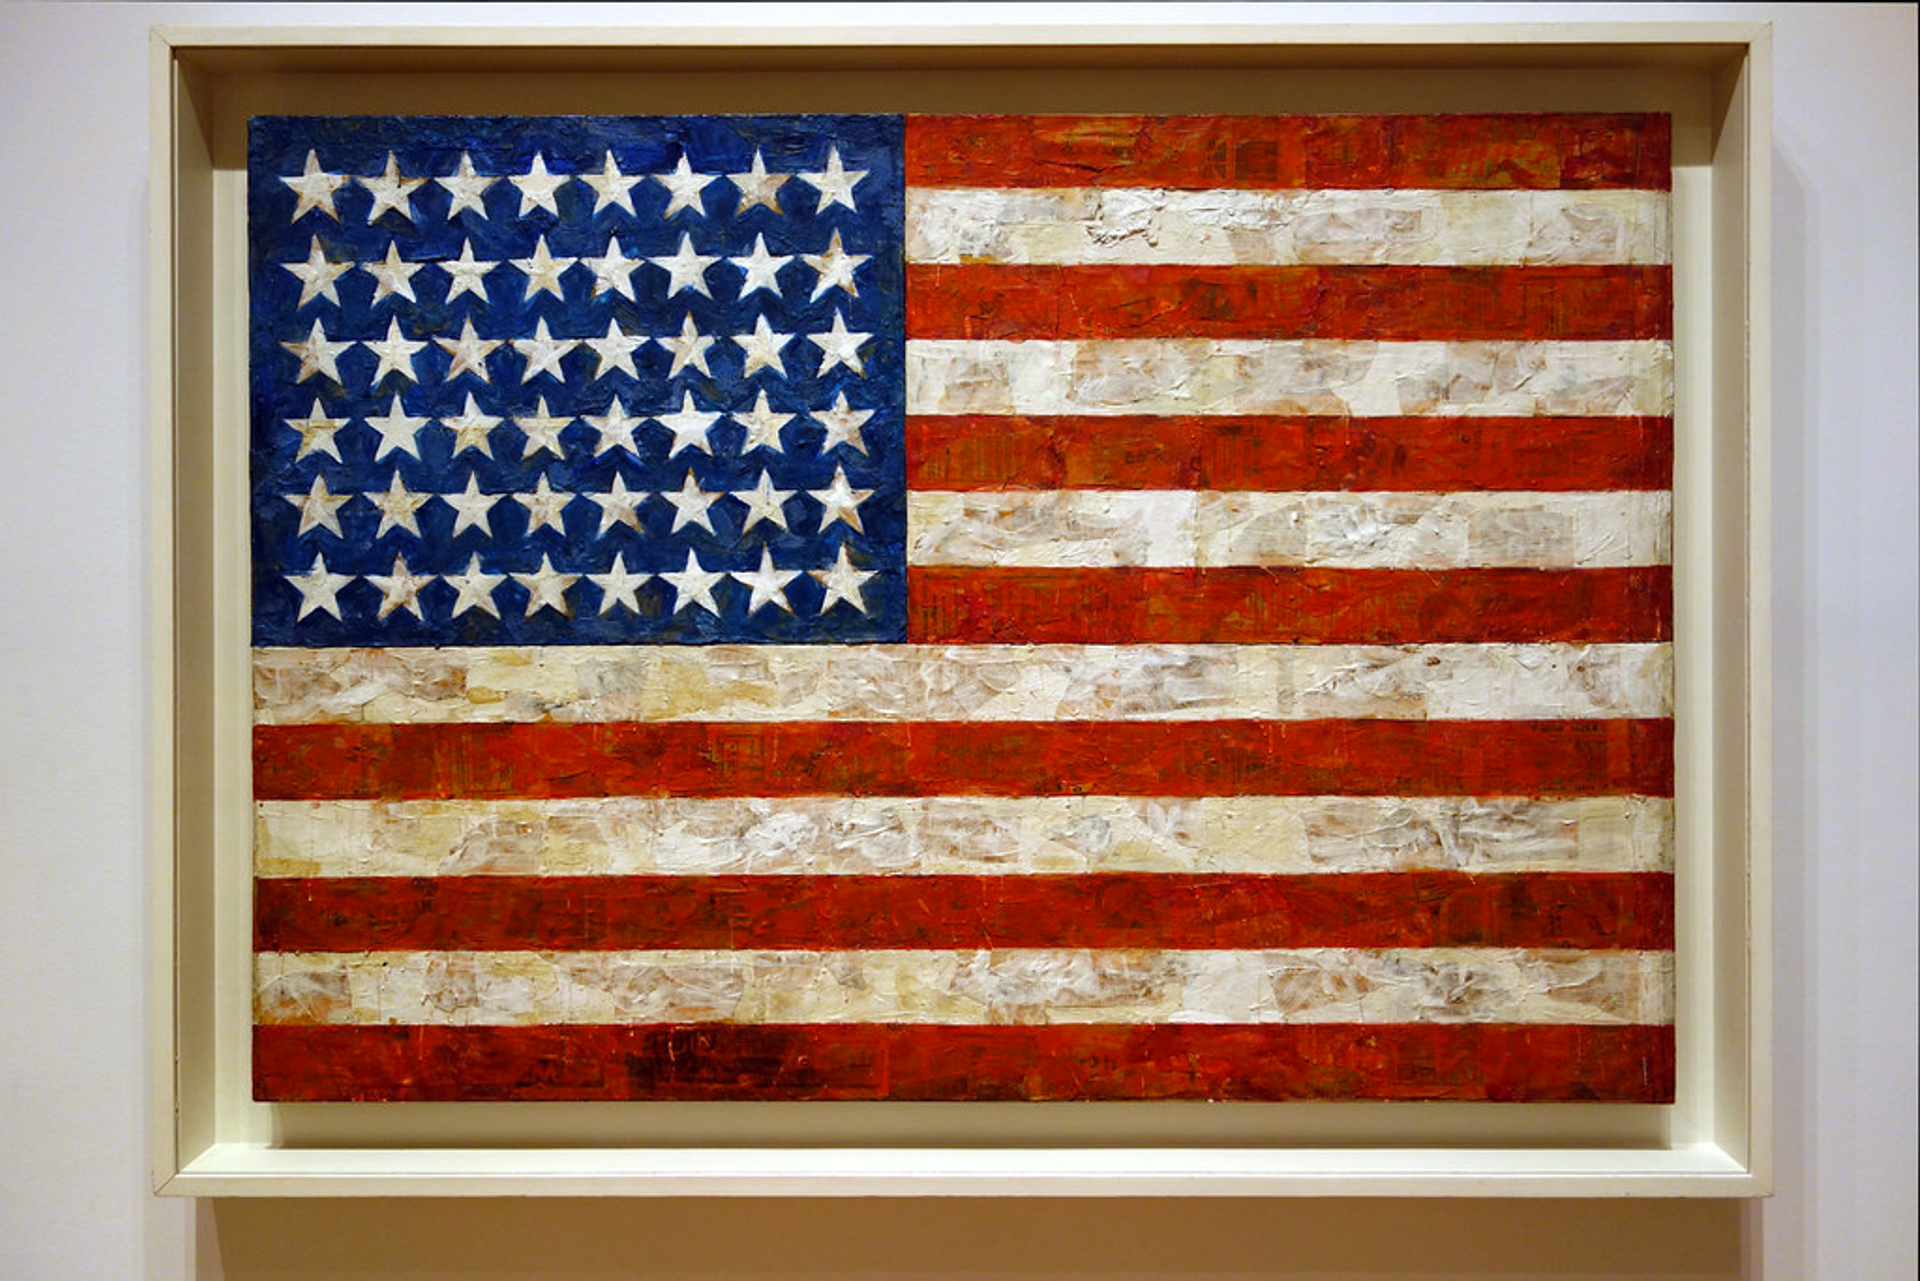 An image of one of Jasper Johns' flag artworks, showing the American flag.